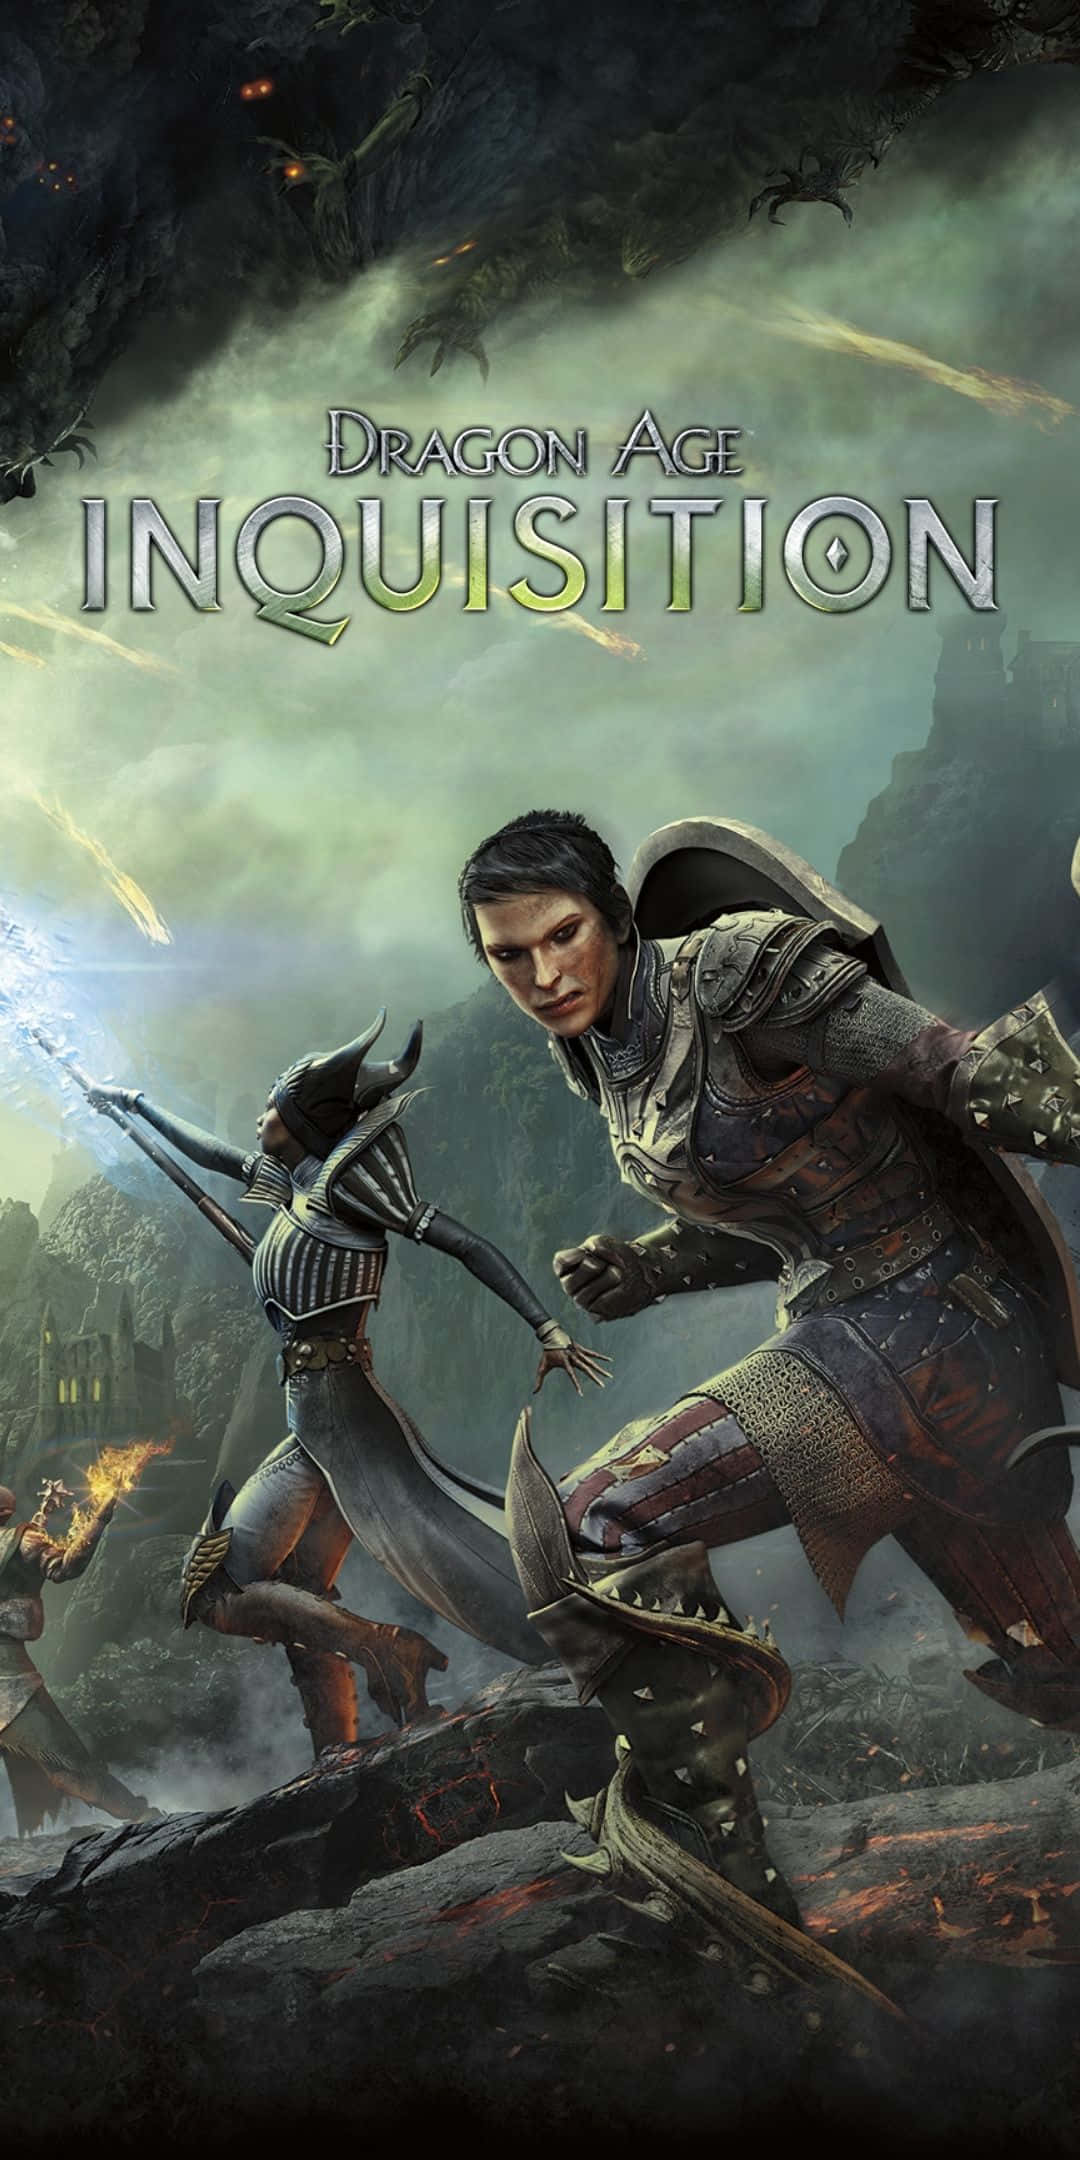 Immerse yourself in the fantasy world of Dragon Age Inquisition with the Pixel 3.